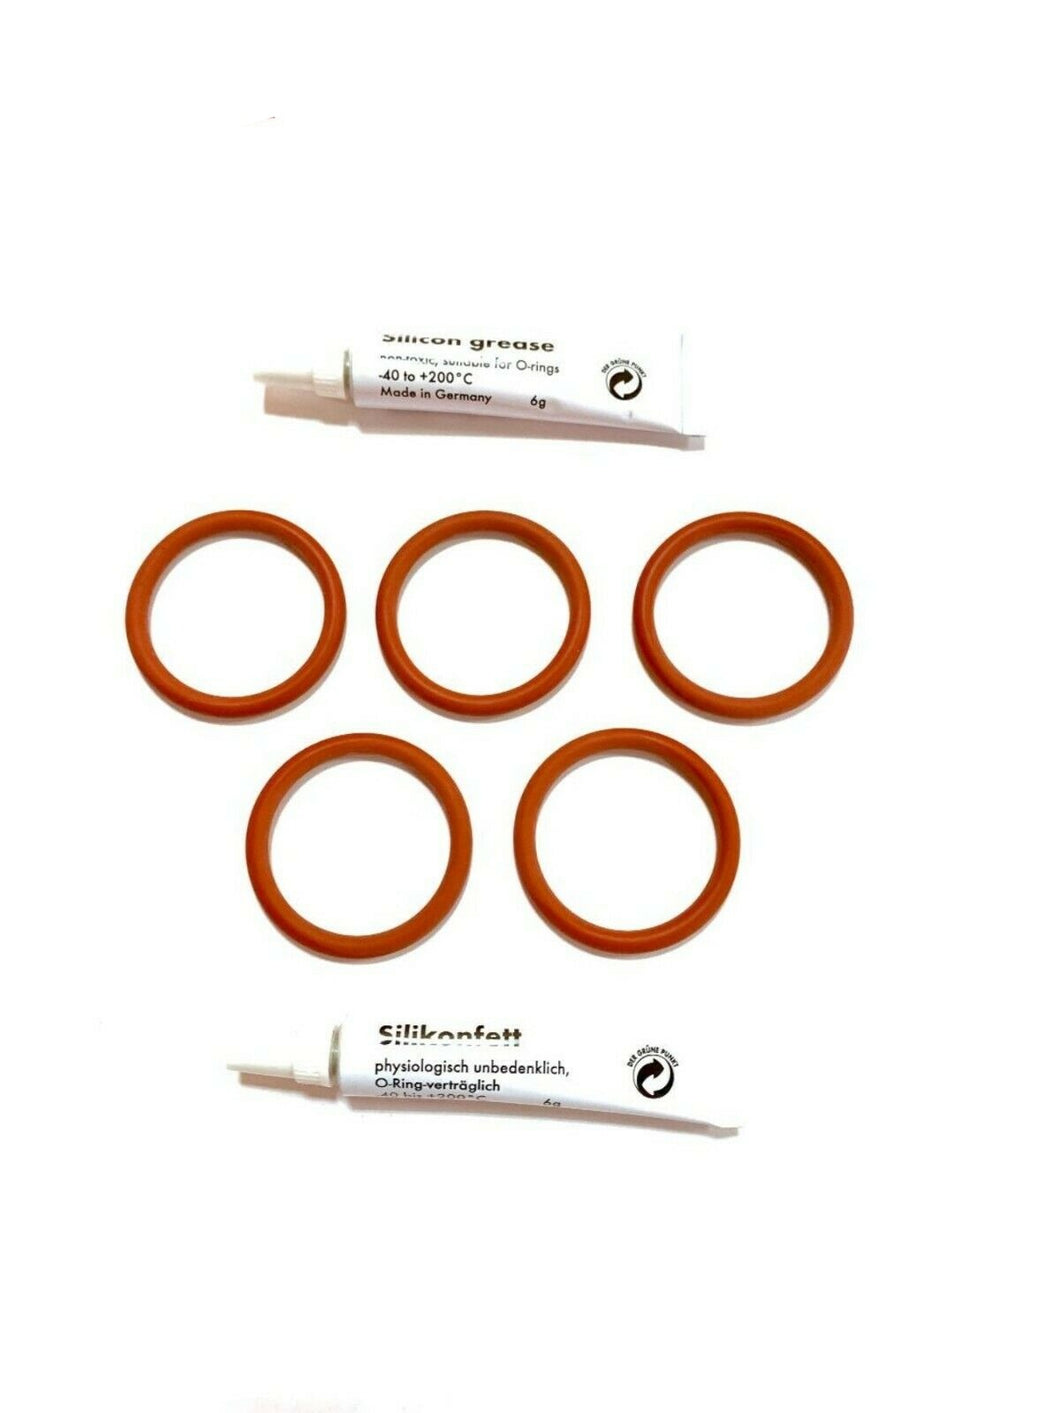 Saeco Set: Maintenance Kit With 5 x O-rings & 2 x Silicon Grease for Brew Group